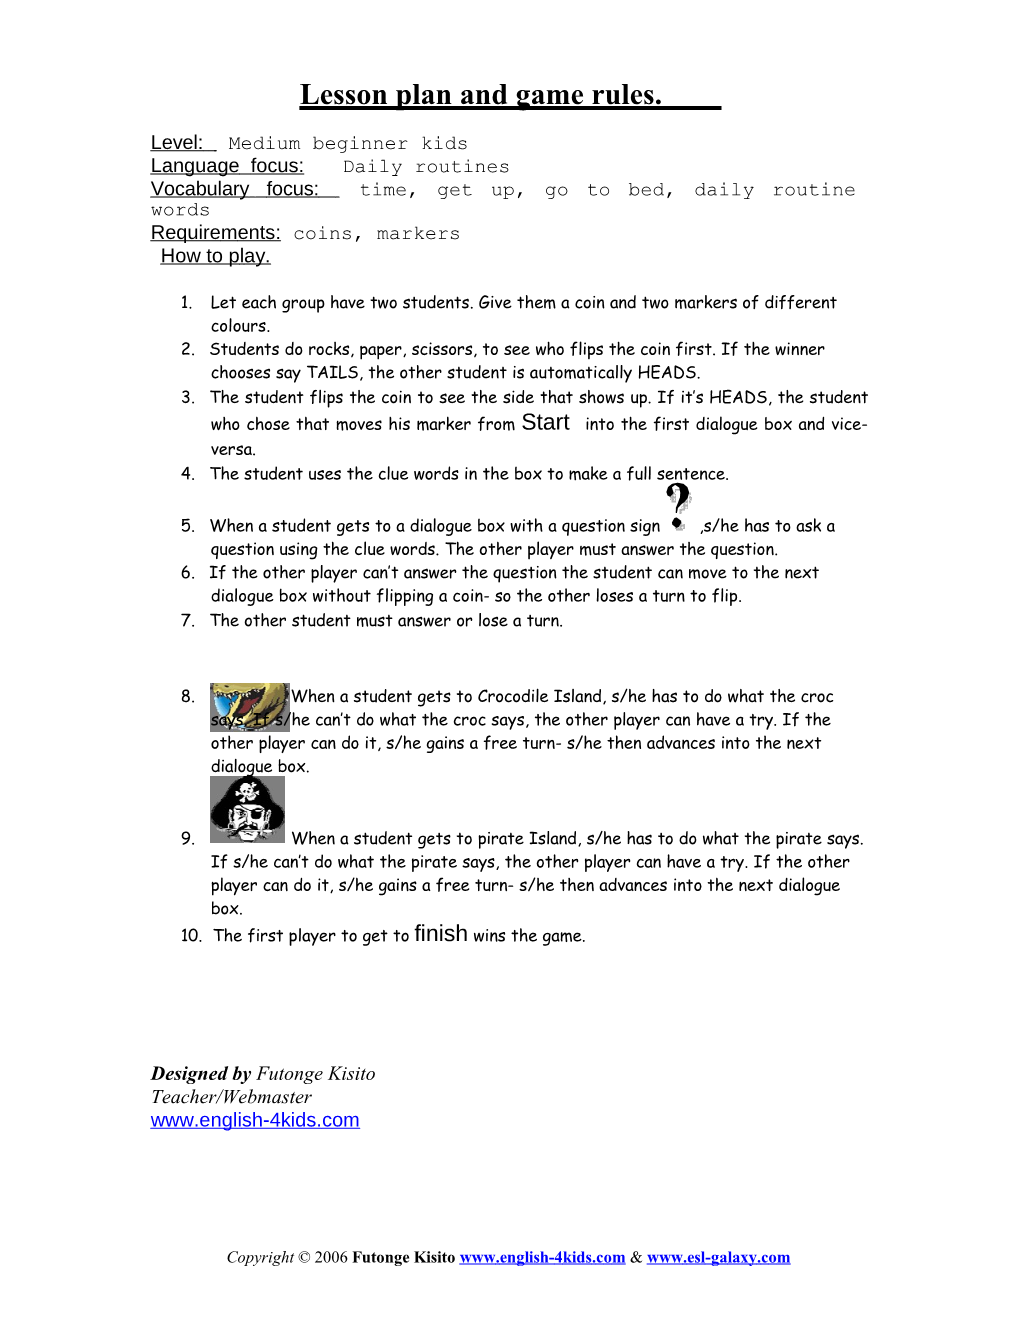 Lesson Plan and Game Rules